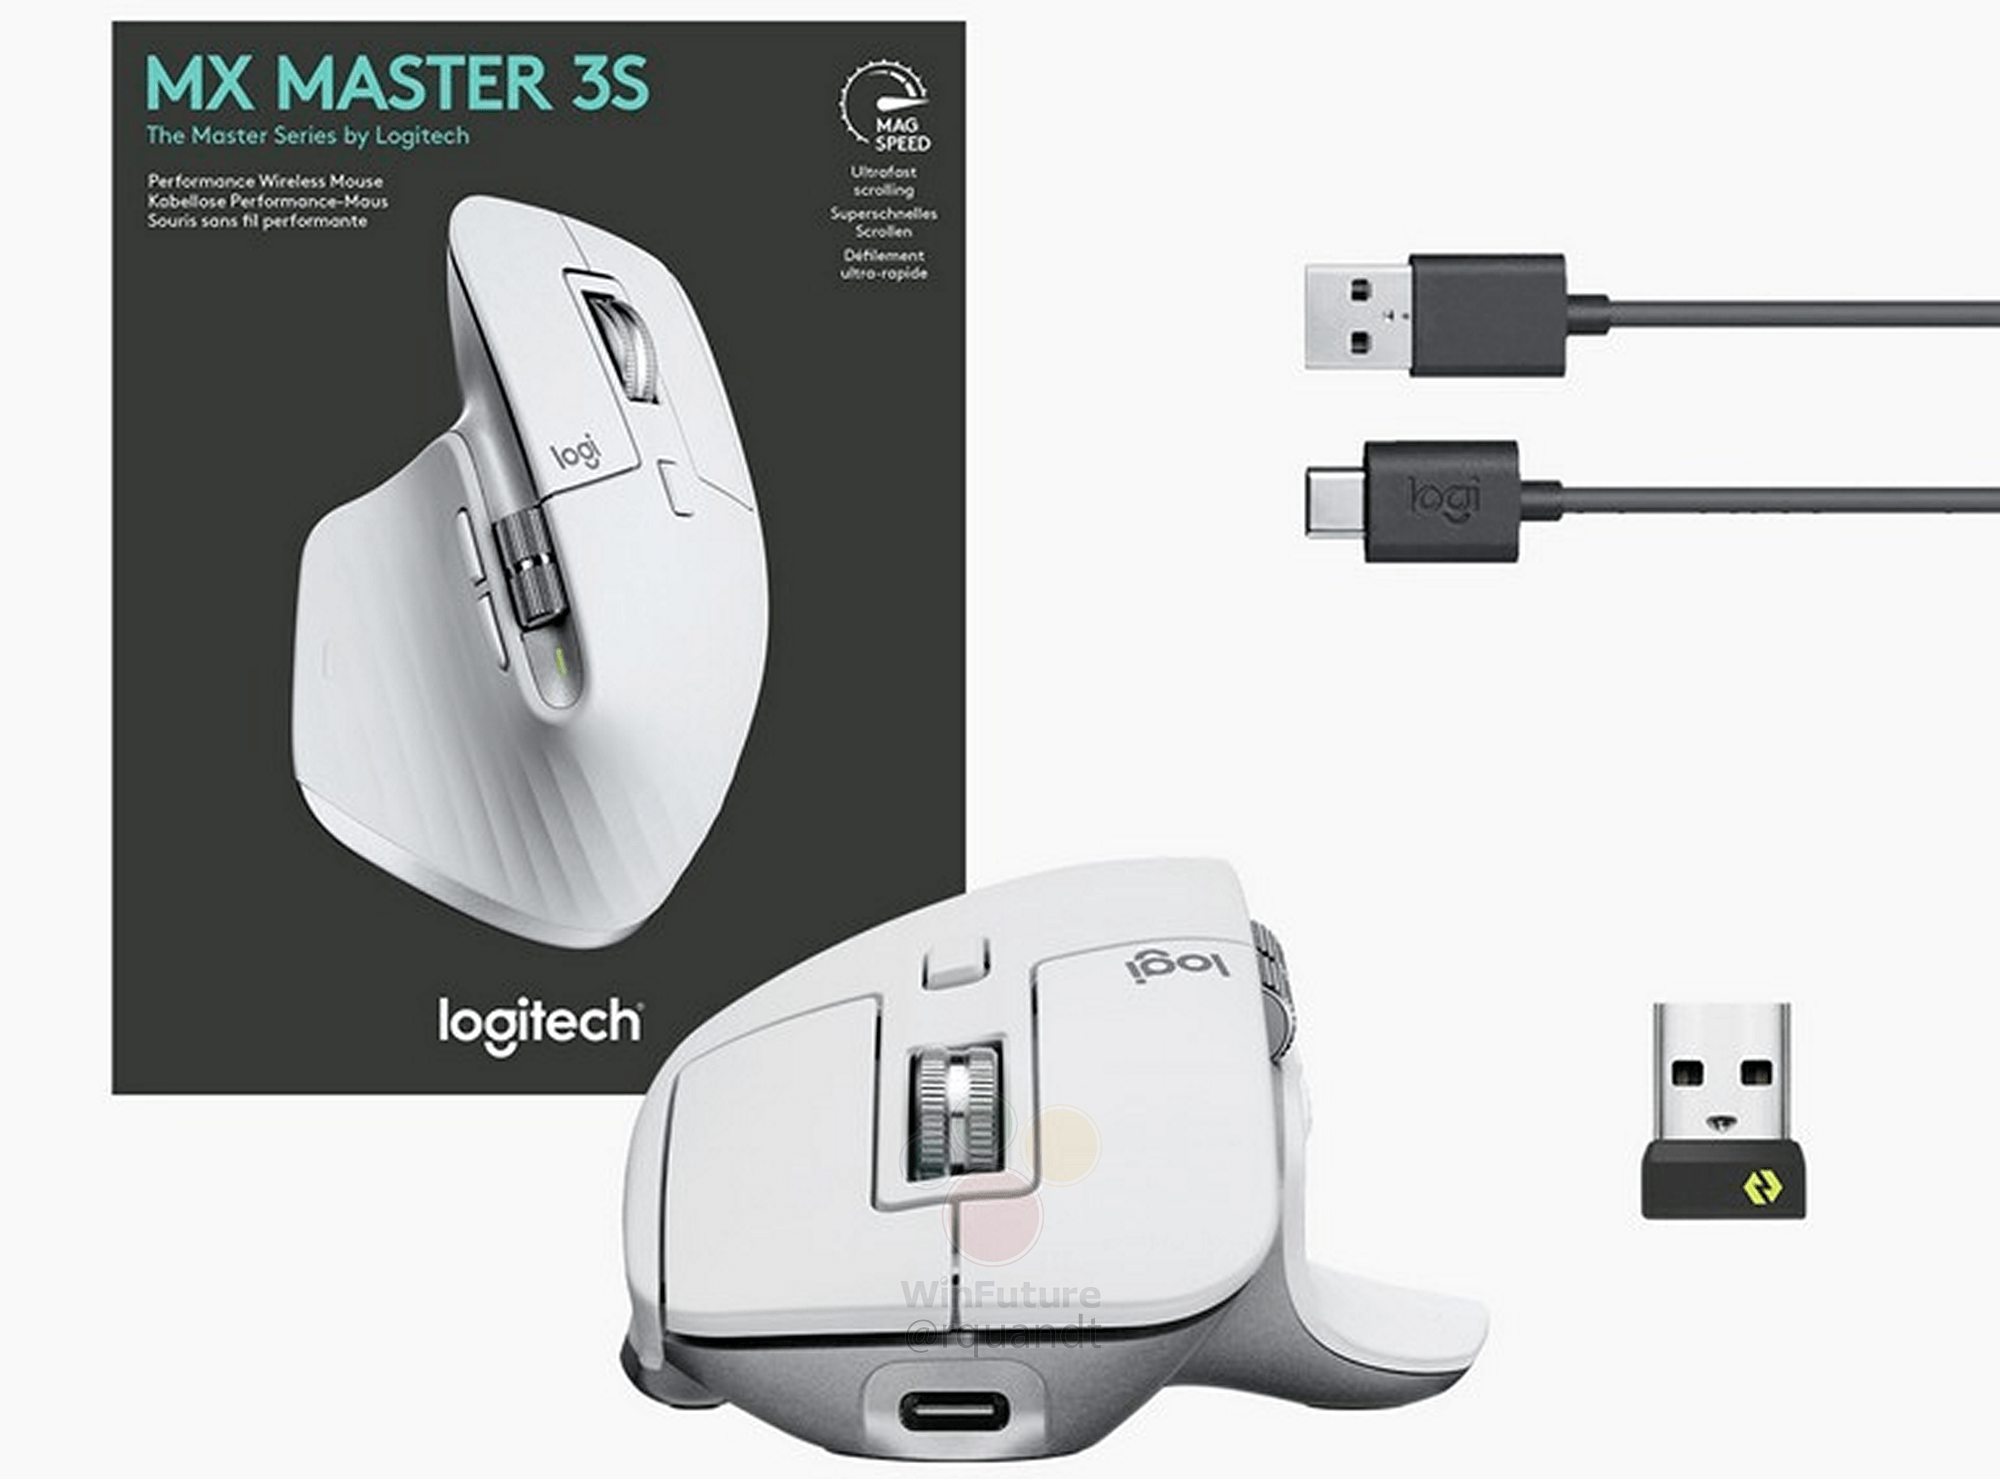 Logitech MX Master 3S: Upcoming wireless mouse leaks with